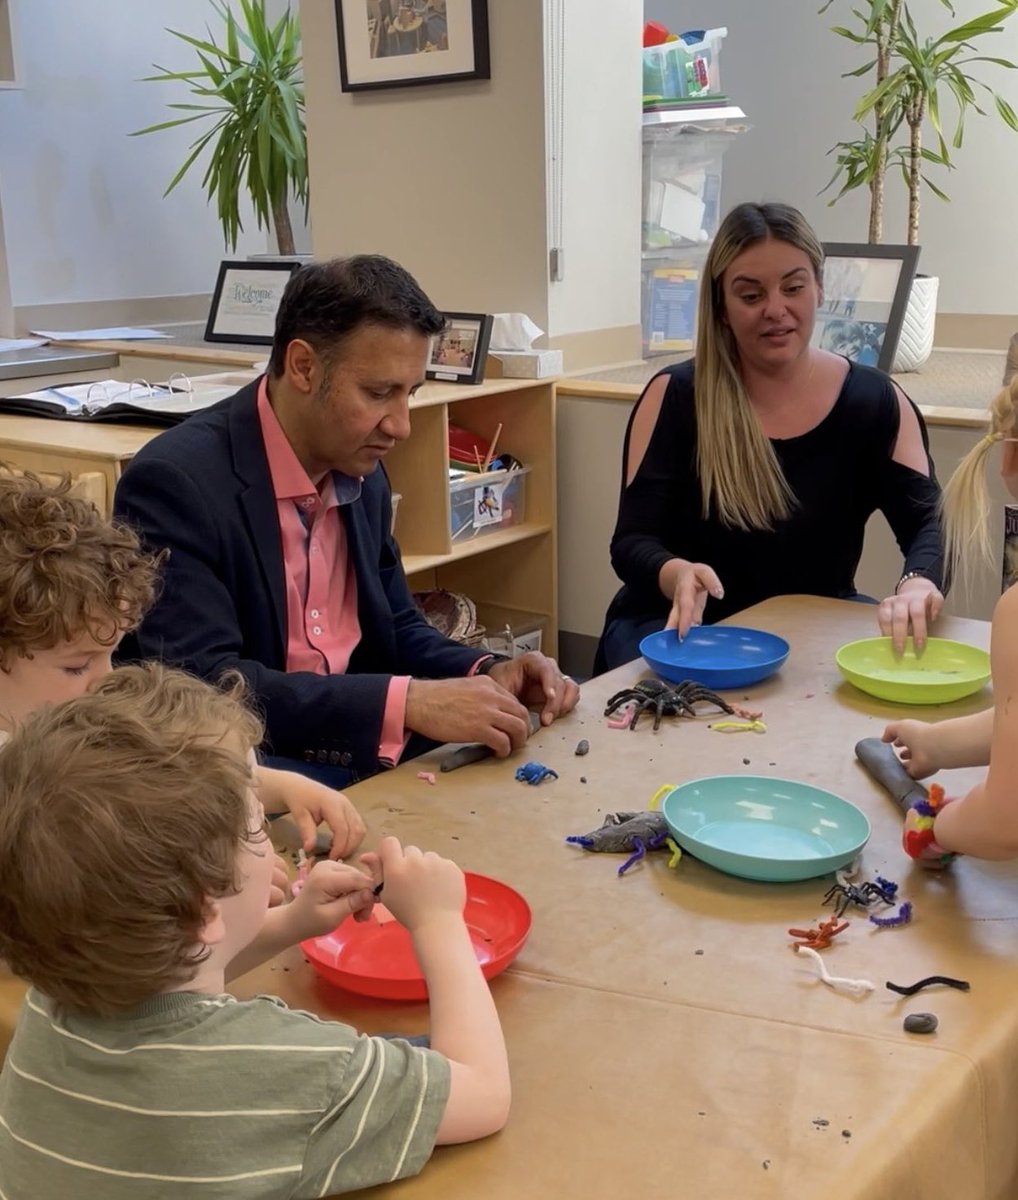 Here at the @YMCAGTA Child Care Centre in Parkdale-High Park, our kids have access to the best opportunities in life through affordable childcare. All Canadians deserve to know that their children are well taken care of while they provide for their families. #CWELCC